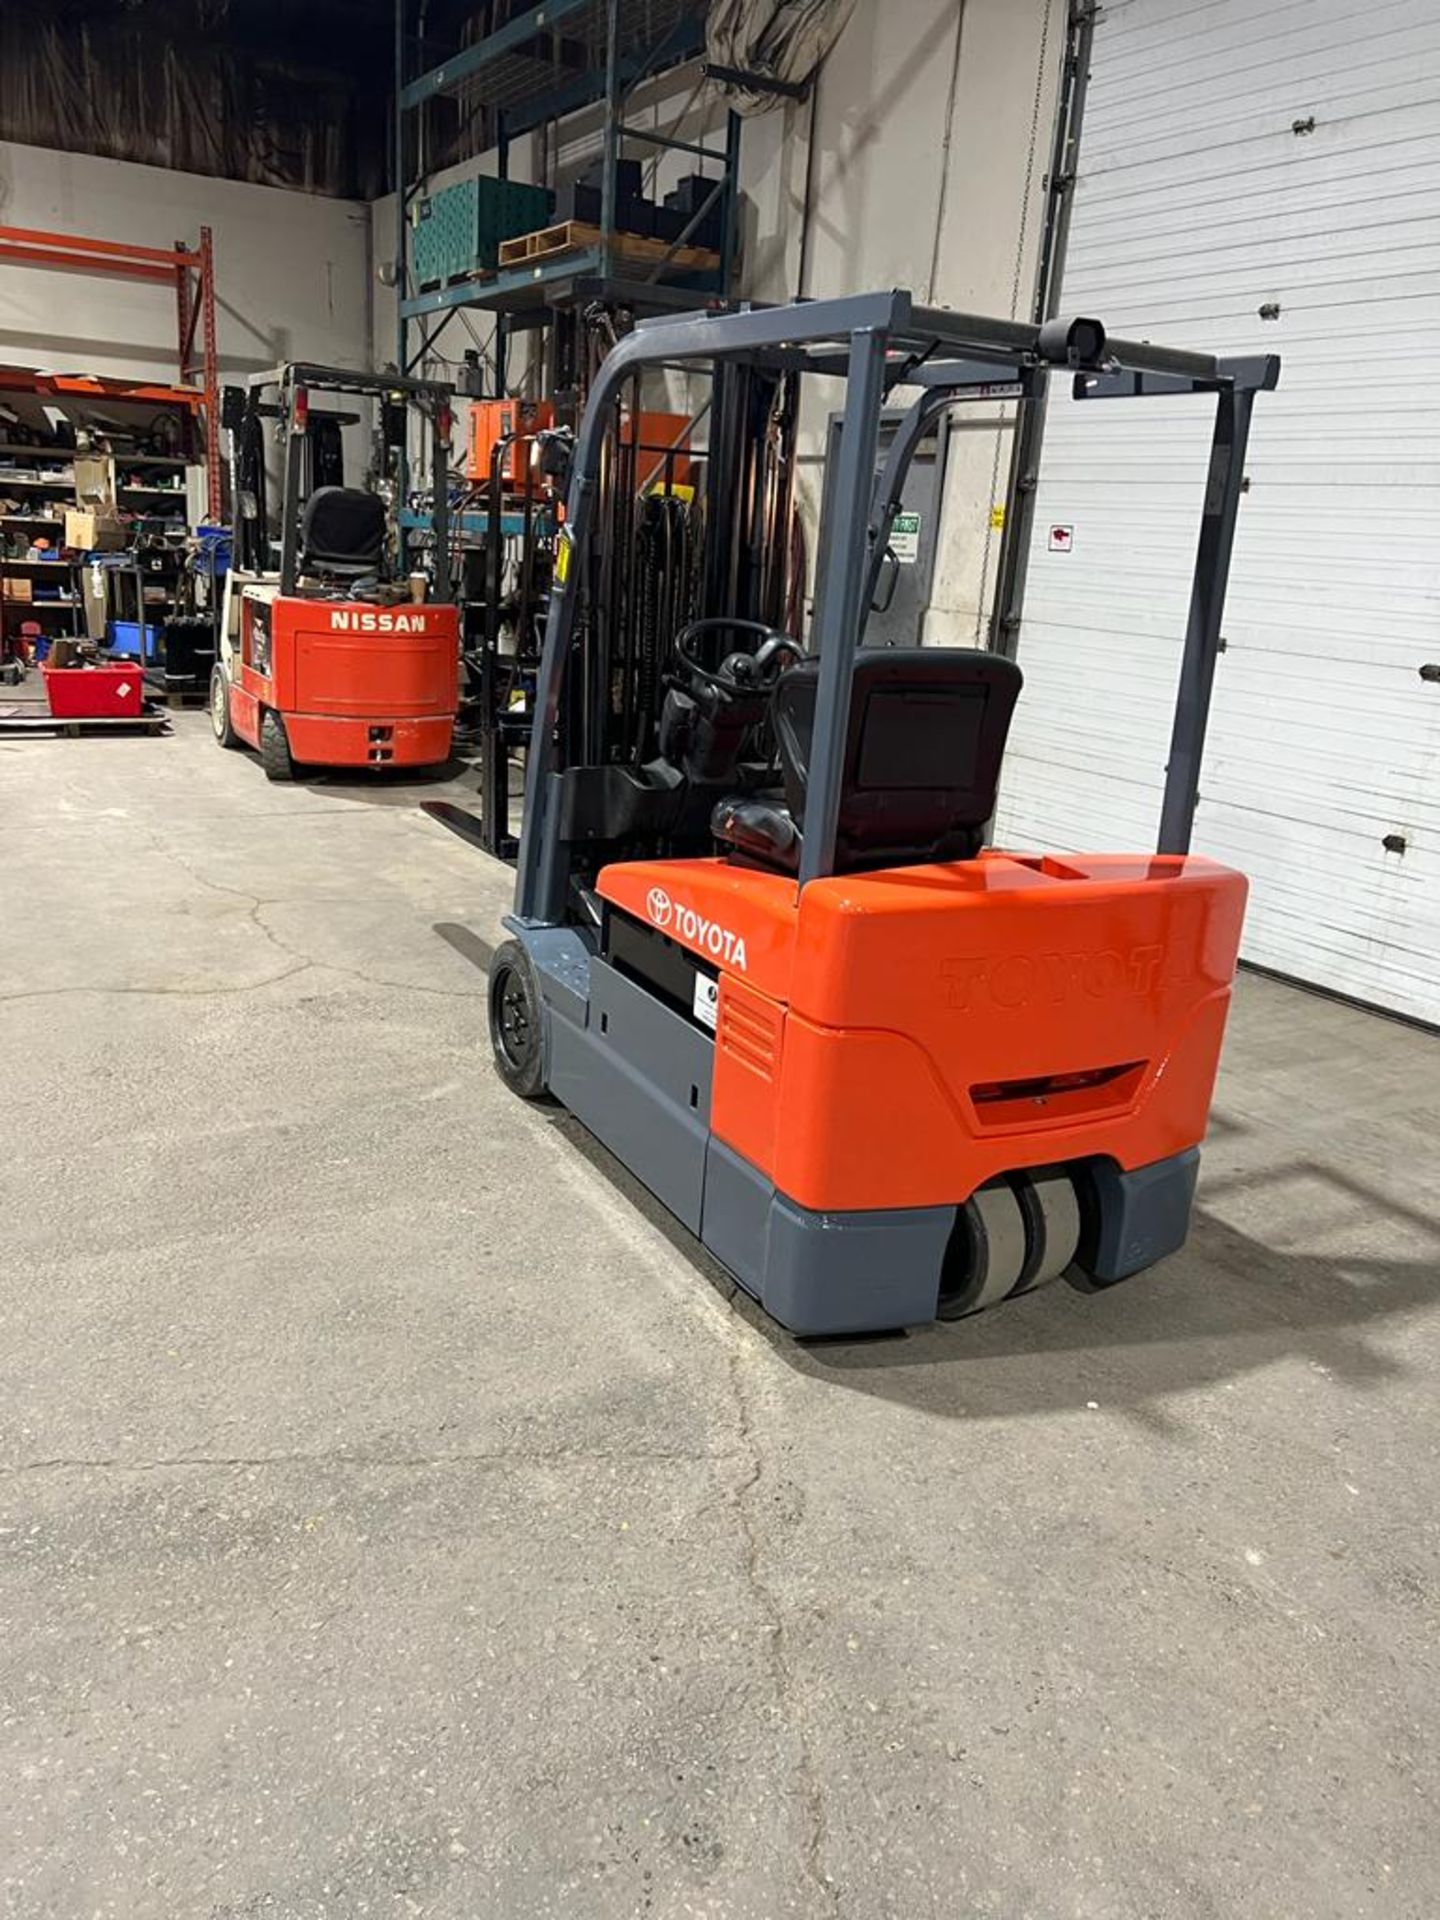 Toyota 4,000lbs Capacity Forklift Electric 36V 3-Wheel with Sideshift 3-stage mast - FREE CUSTOMS - Image 2 of 4